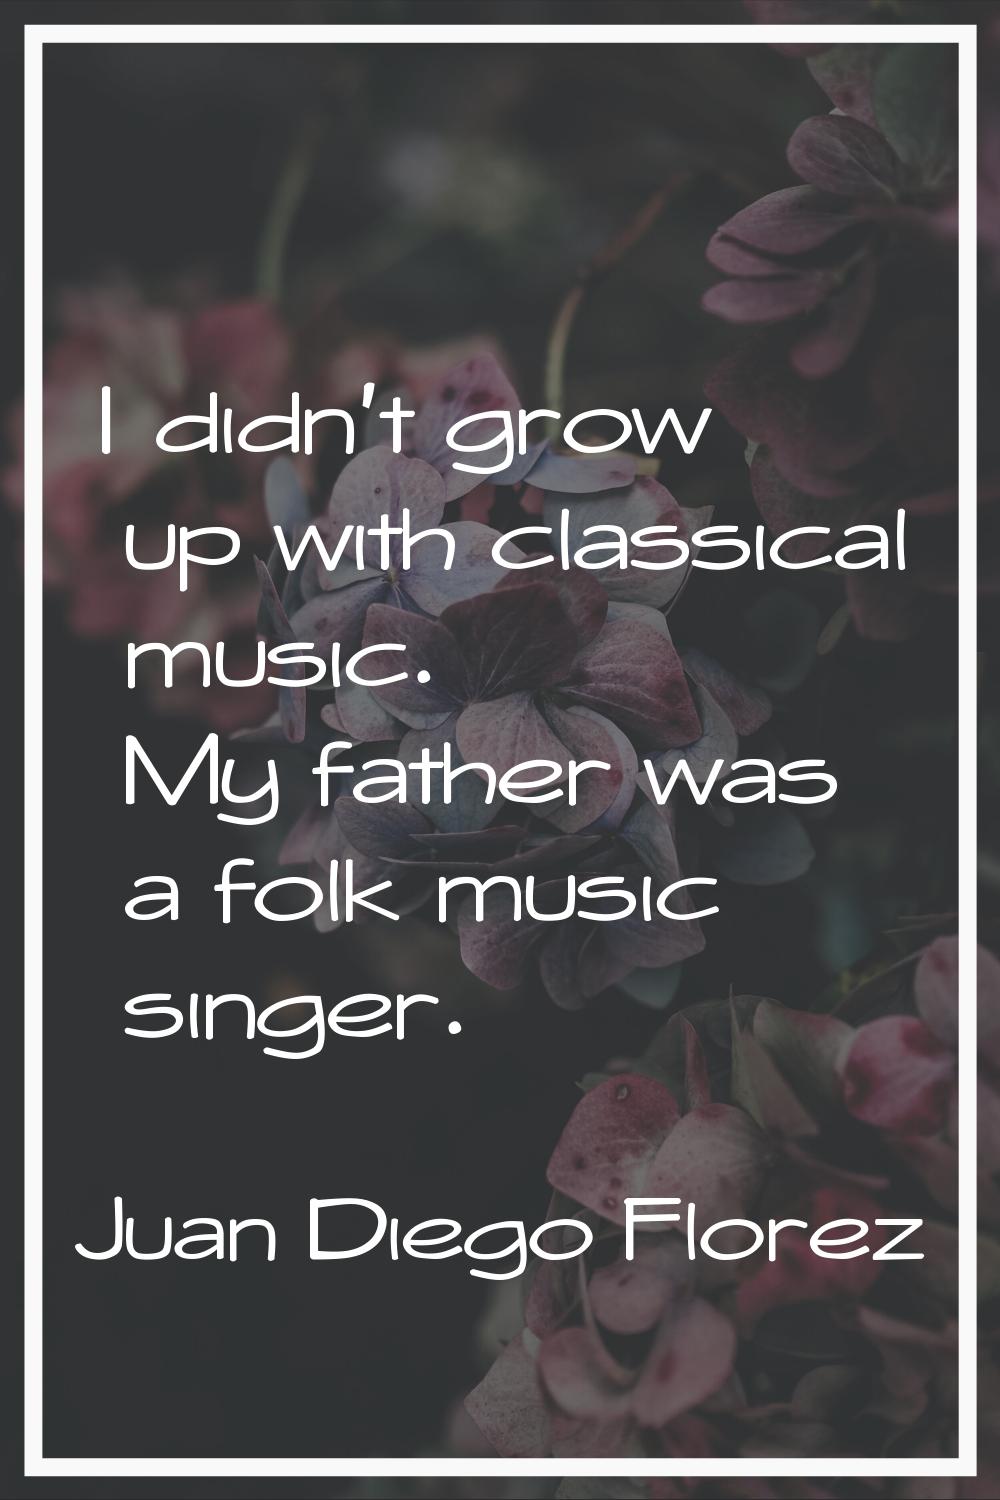 I didn't grow up with classical music. My father was a folk music singer.